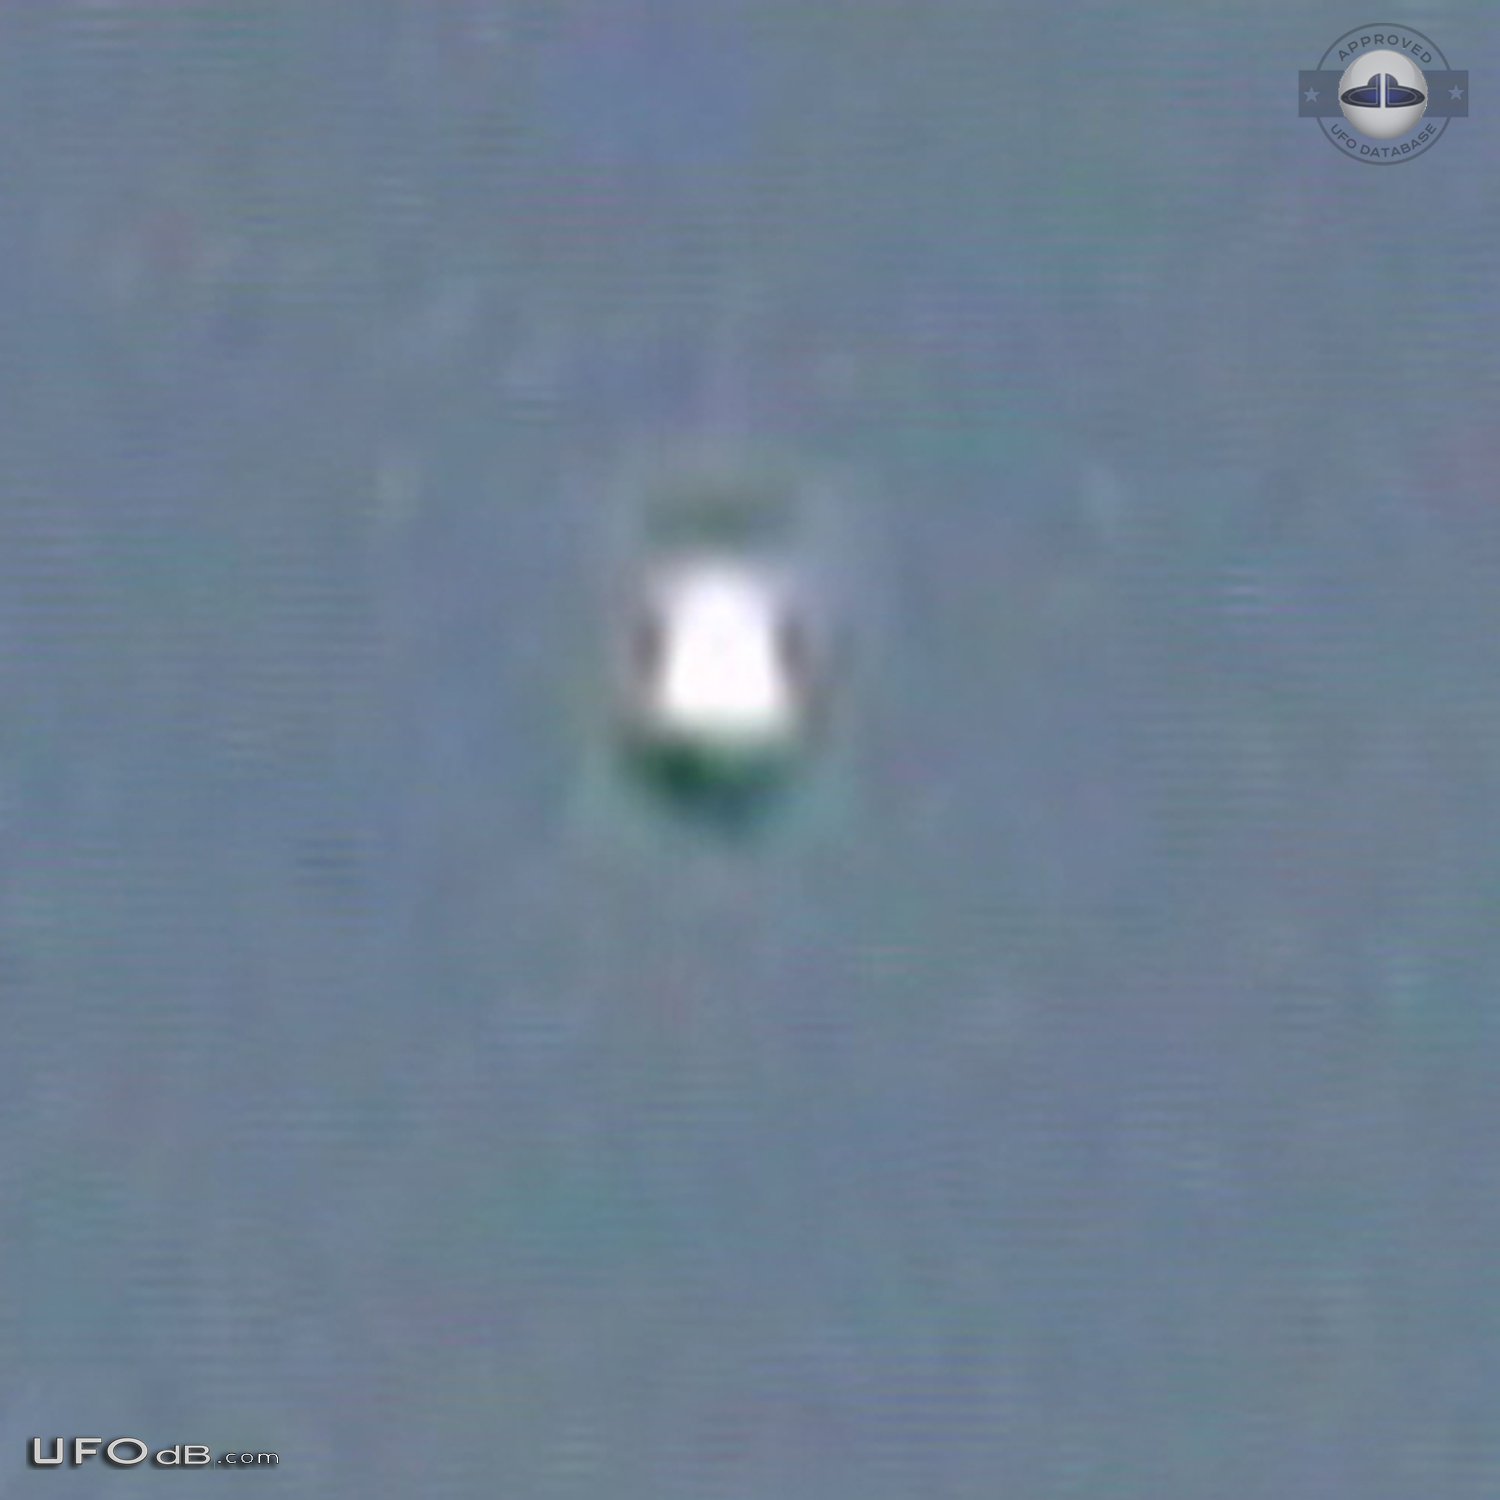 UFO came to about 2000 in elevation from the 30 000 feet - Canada 2011 UFO Picture #698-3